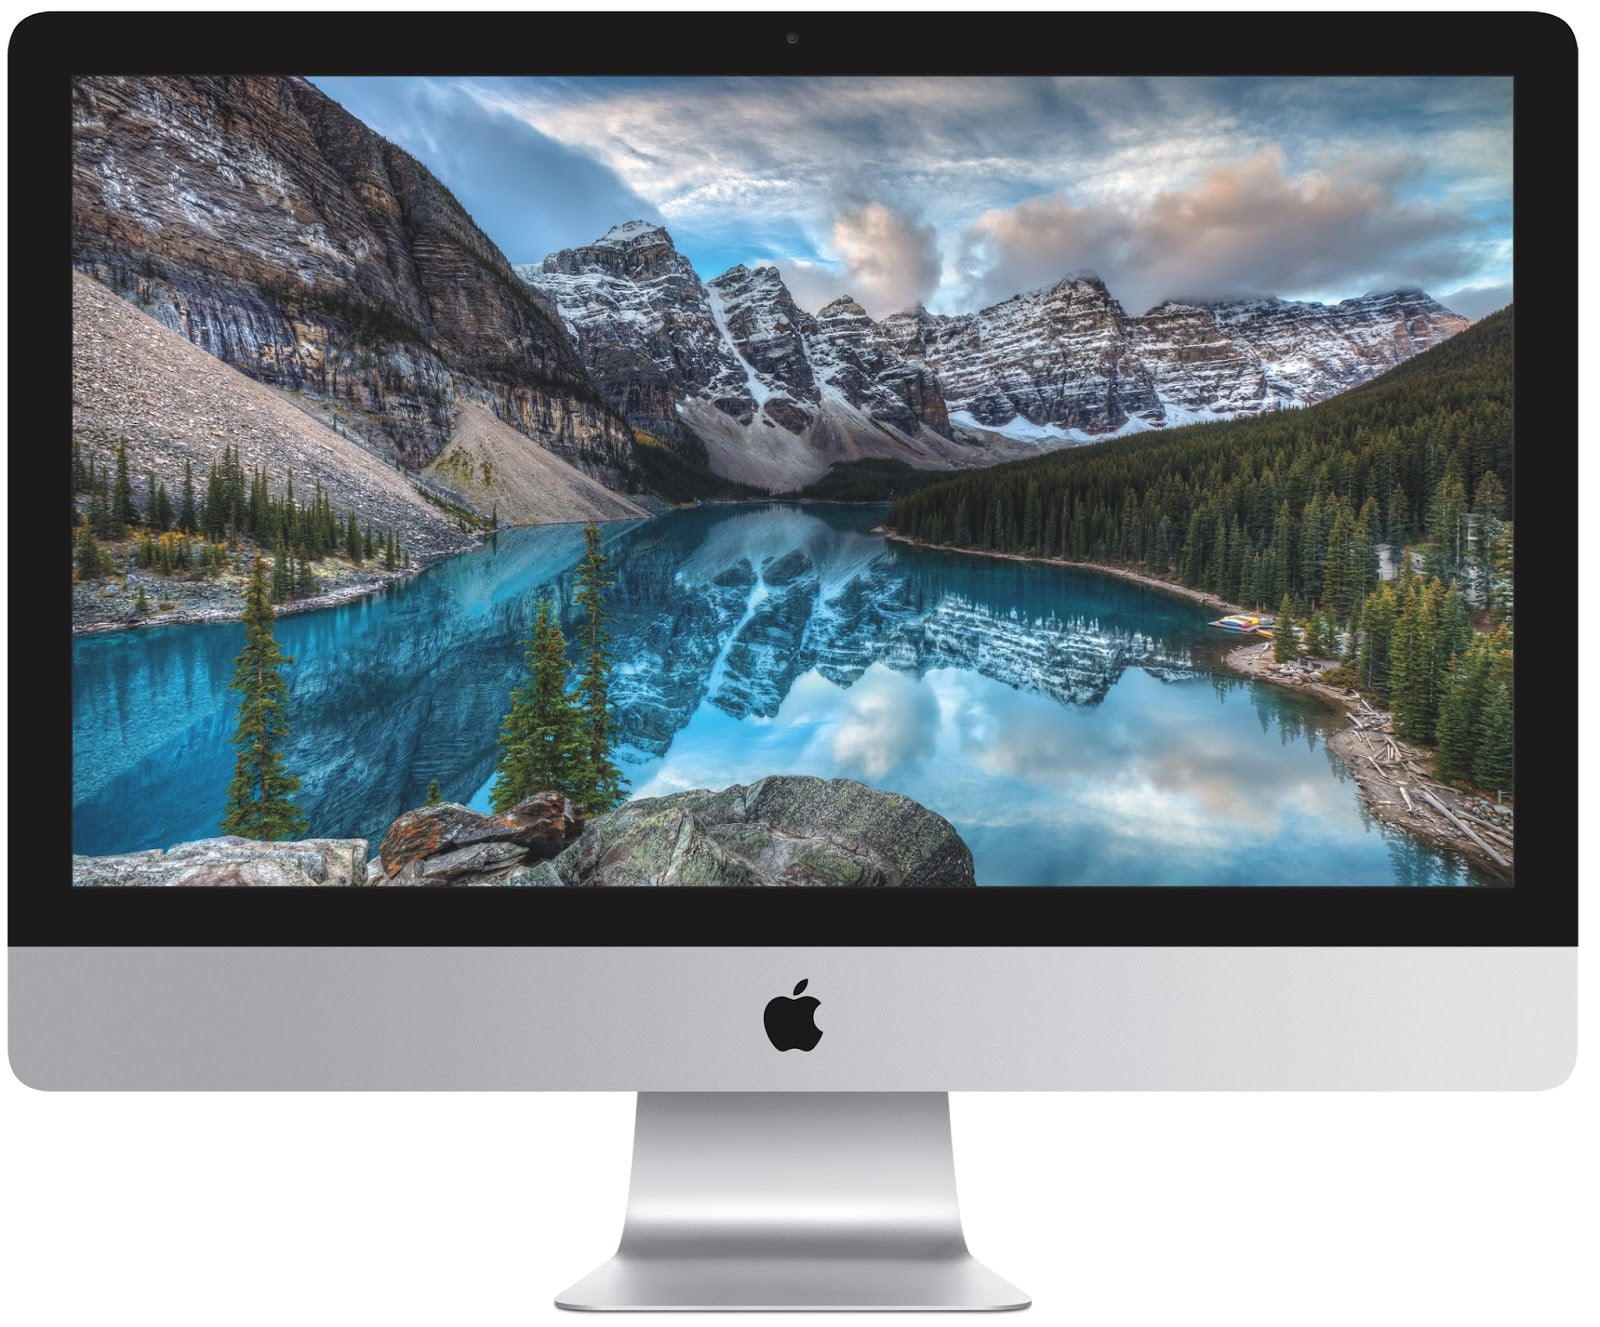 iMac late 2015 21.5 inch part 1 | Apple announces new iMac 21.5-inch with 4K display | Bond High Plus